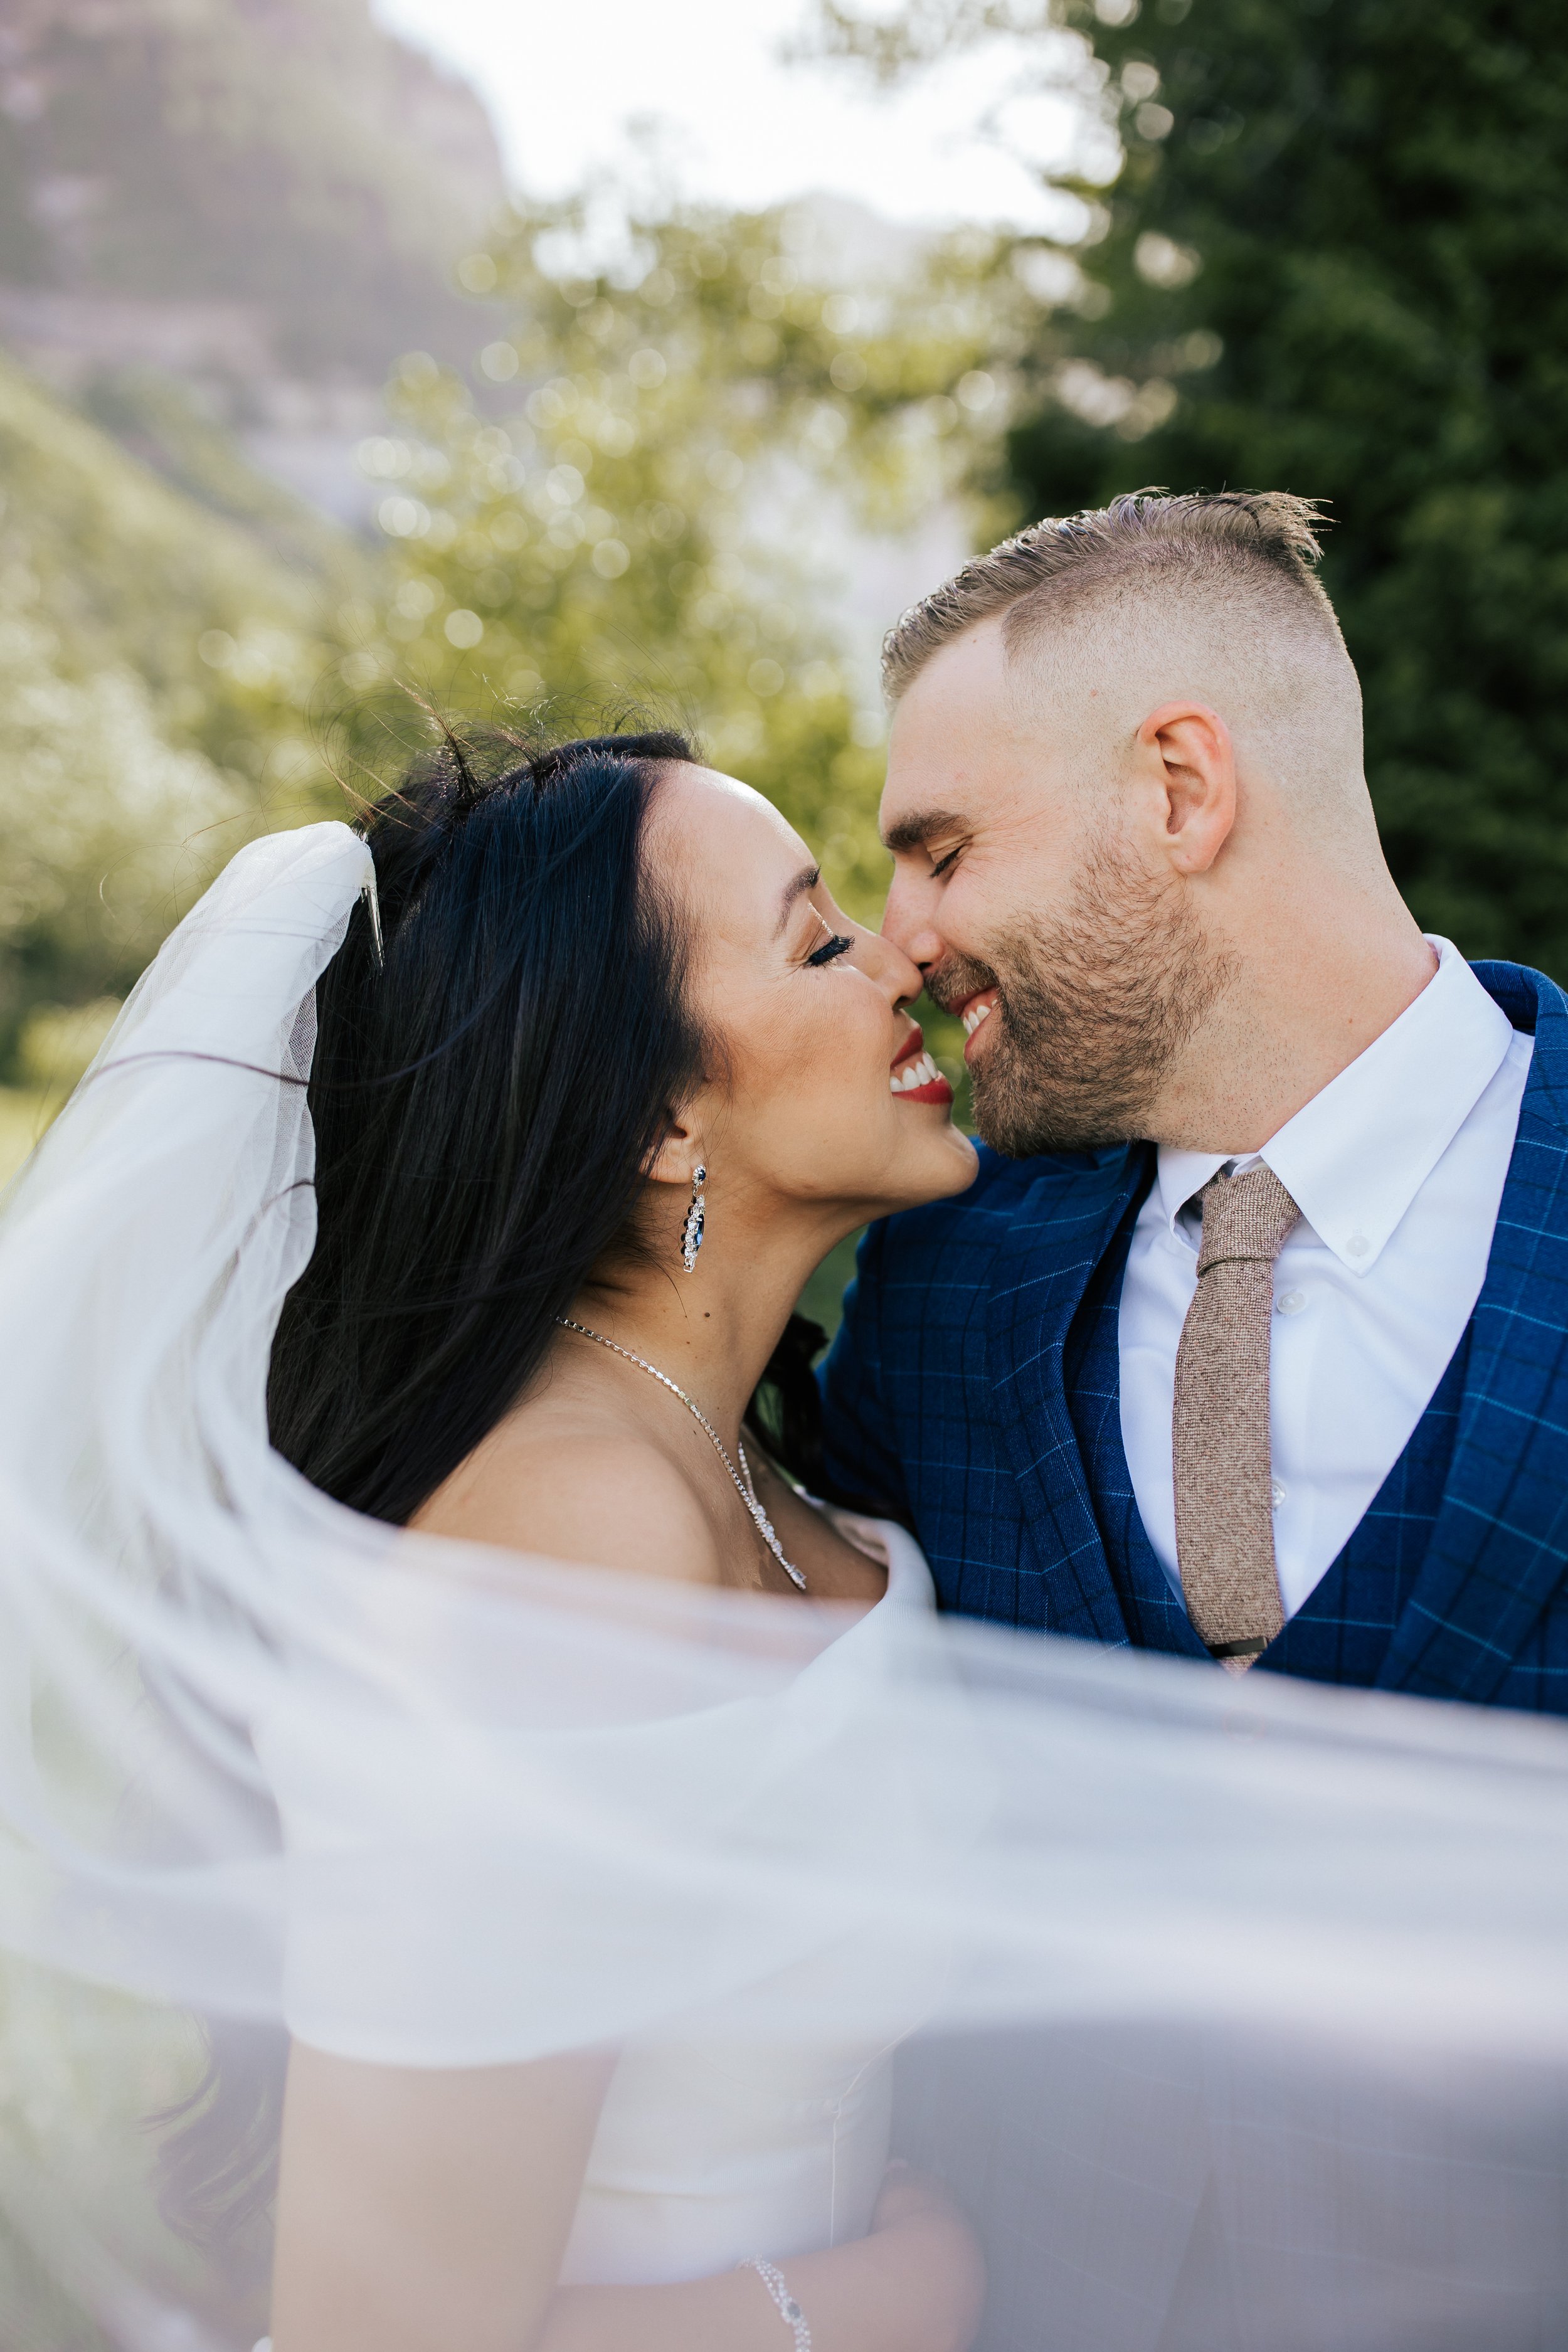  Portrait session with bride and groom before their wedding ceremony in Aspen Grove, Provo Canyon, Utah. Bride’s long veil is draped in the photo frame while bride and groom kiss. #weddingdress #firstlook #bridalportraits 